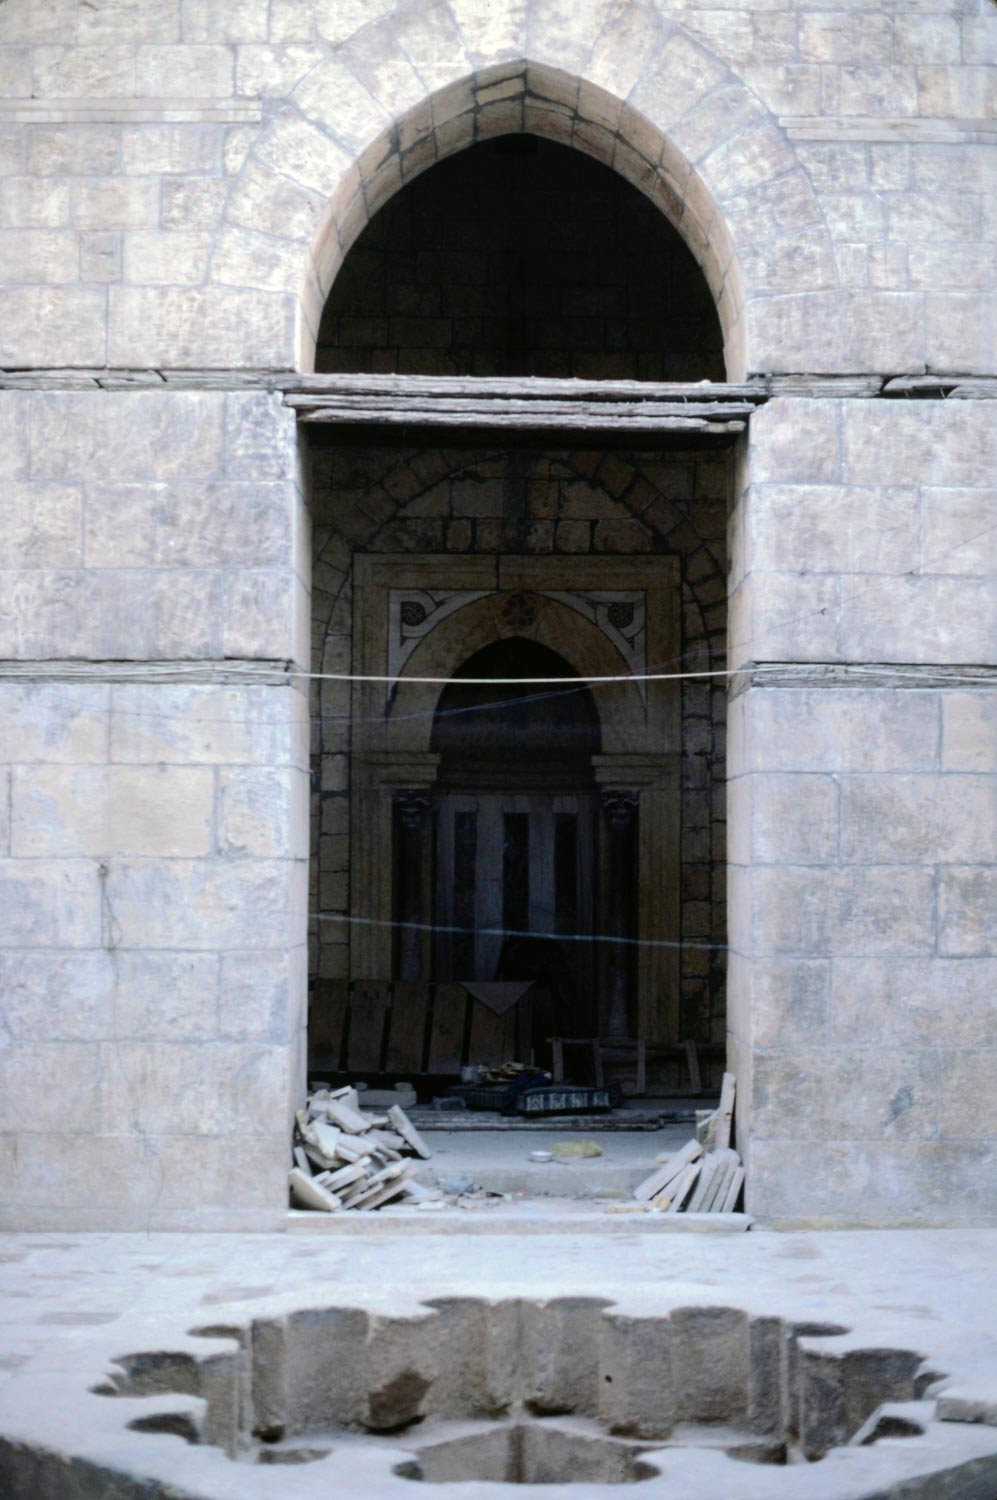 View from the courtyard through an archway towards the mihrab